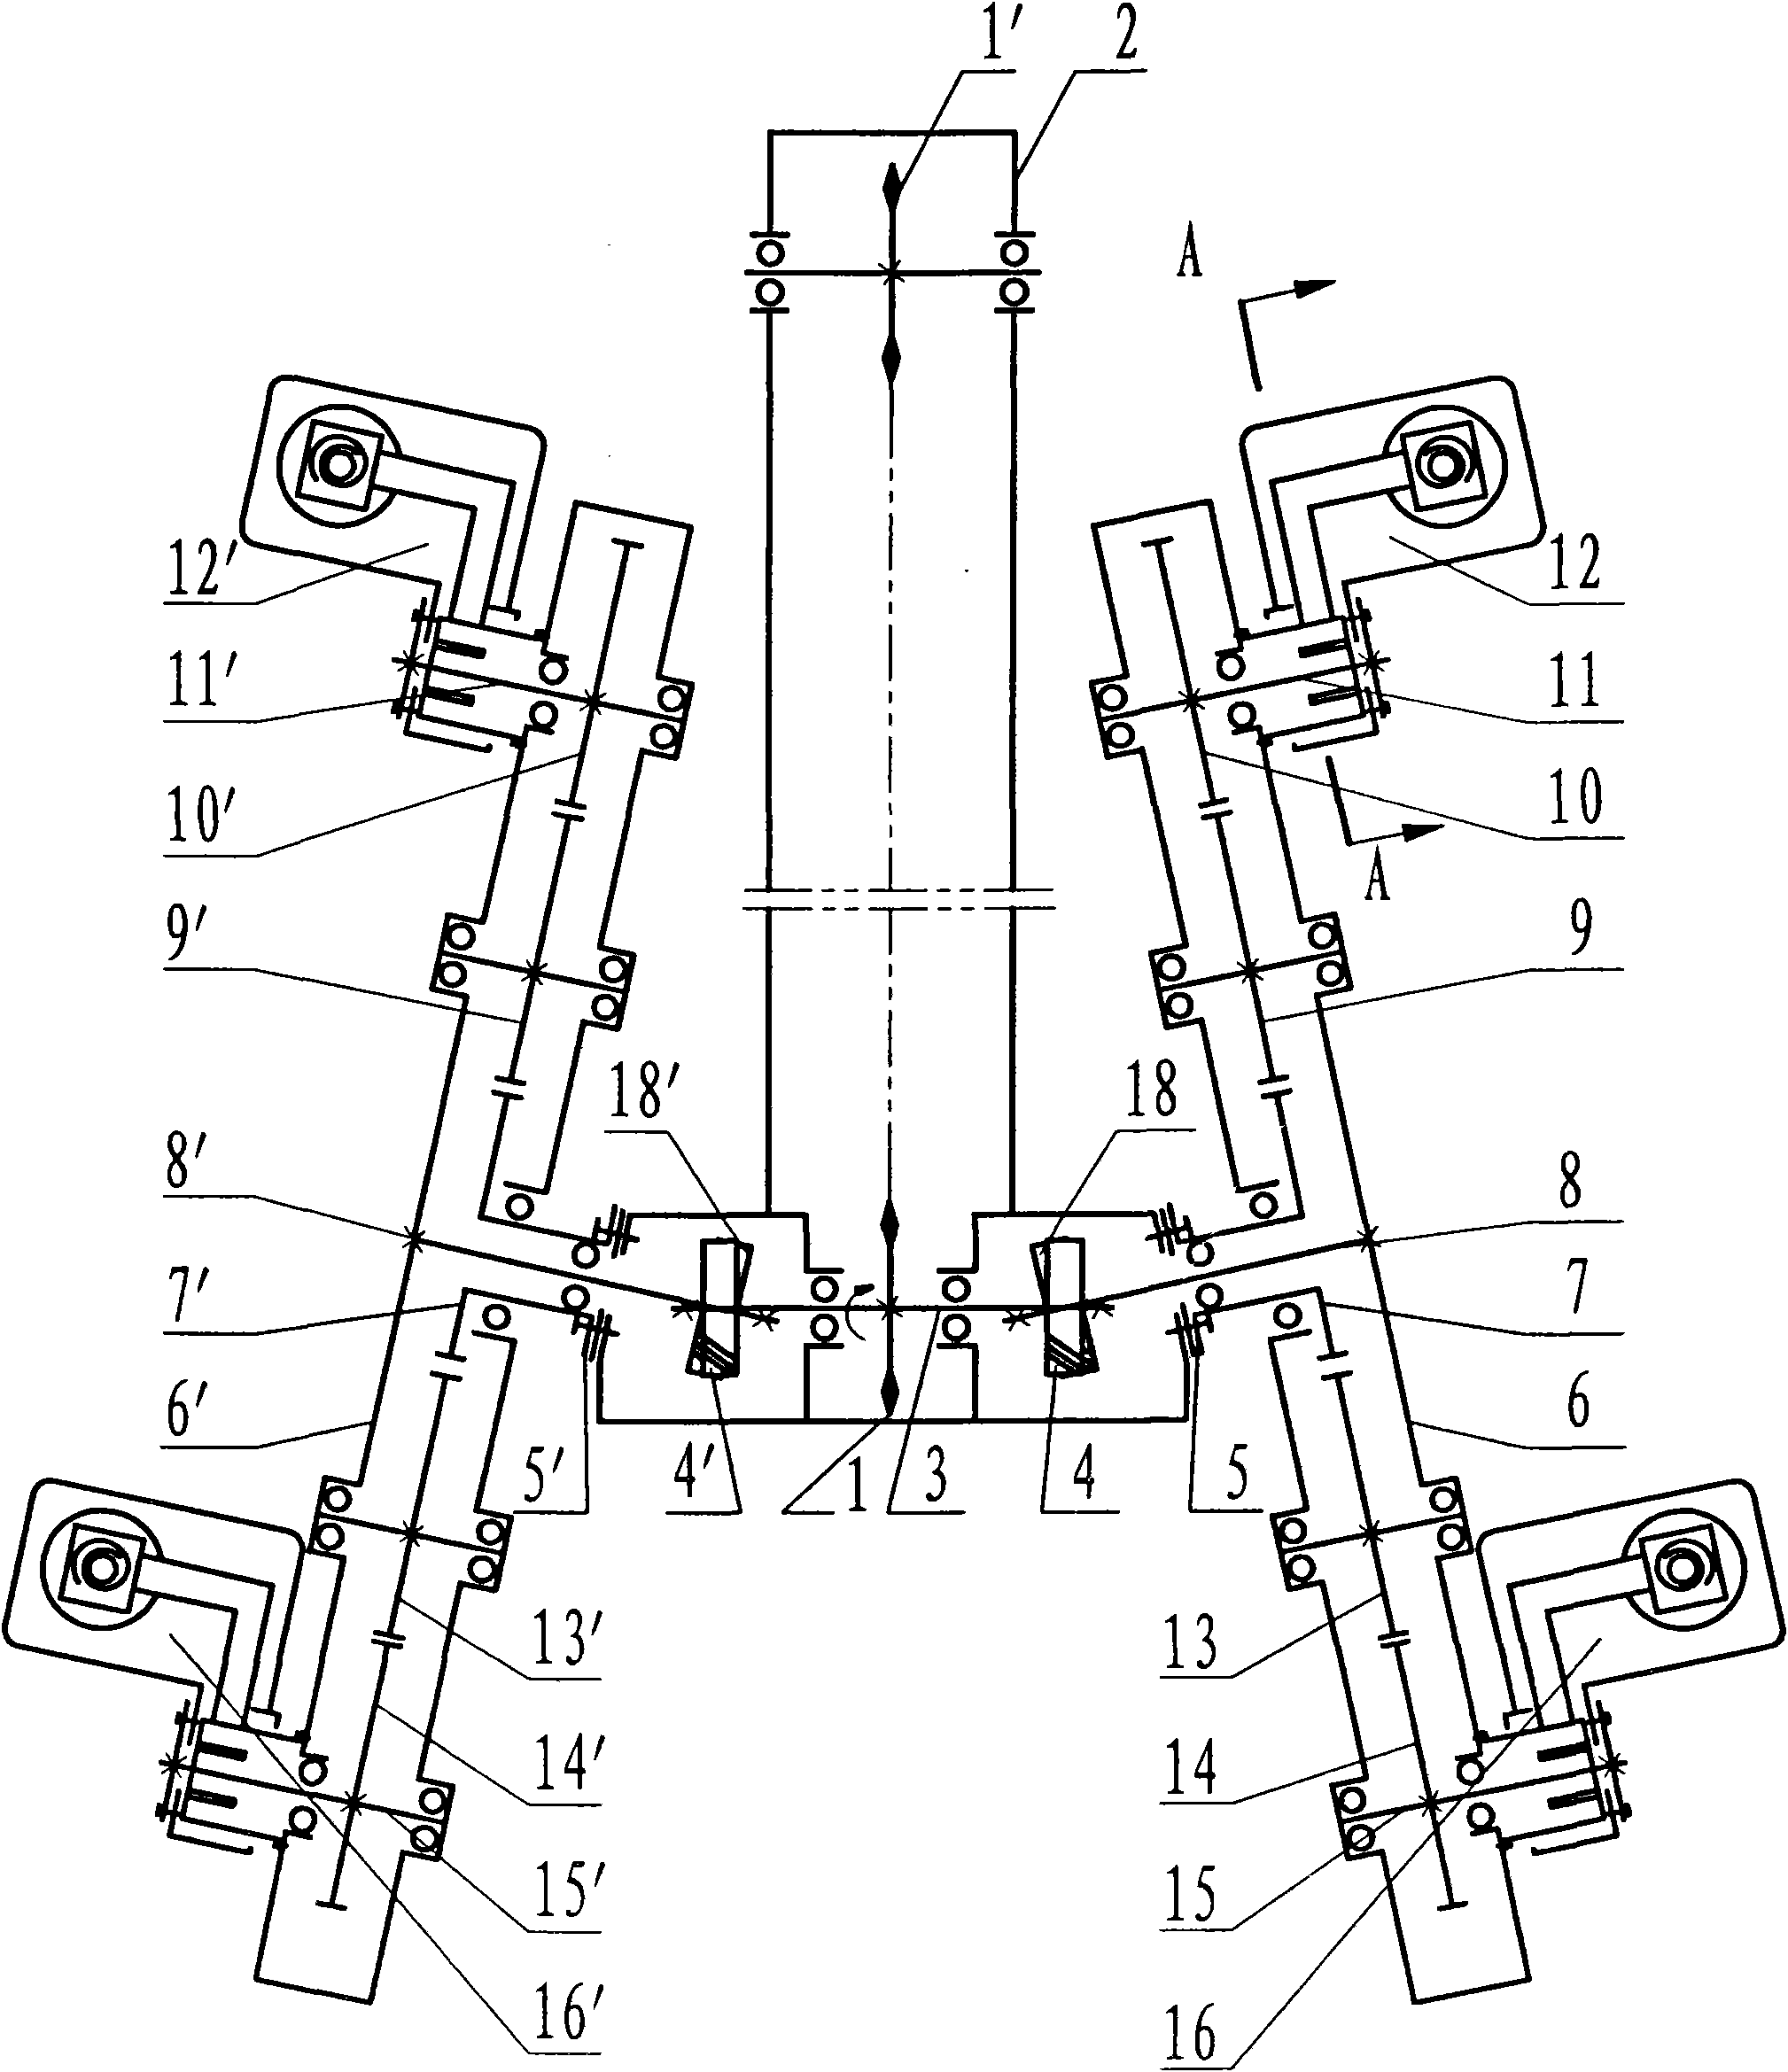 Transplanting mechanism of gear driving oblique wide and narrow row seedling transplanter